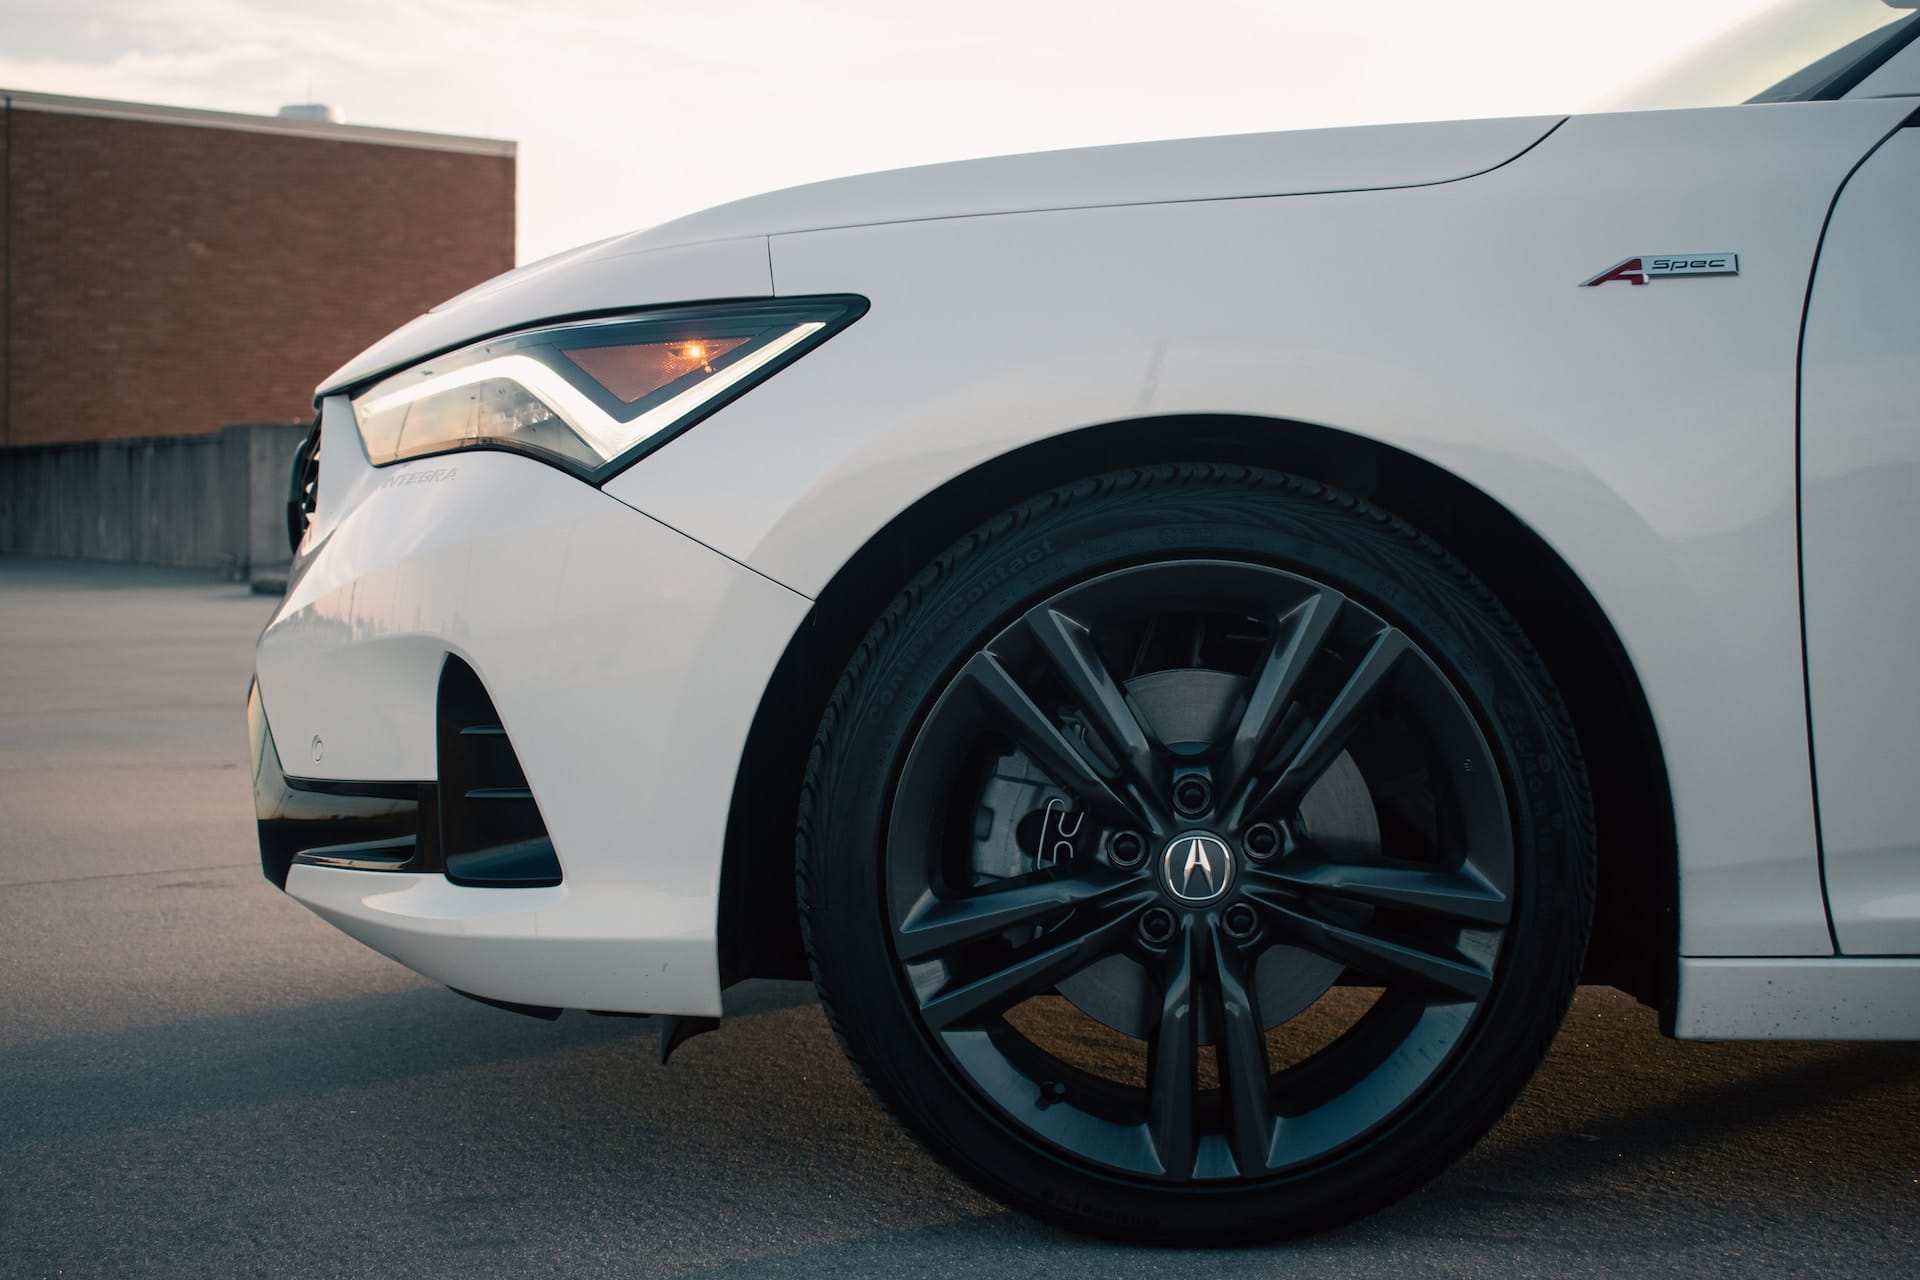 What You Should Know Before Moving an Acura TLX